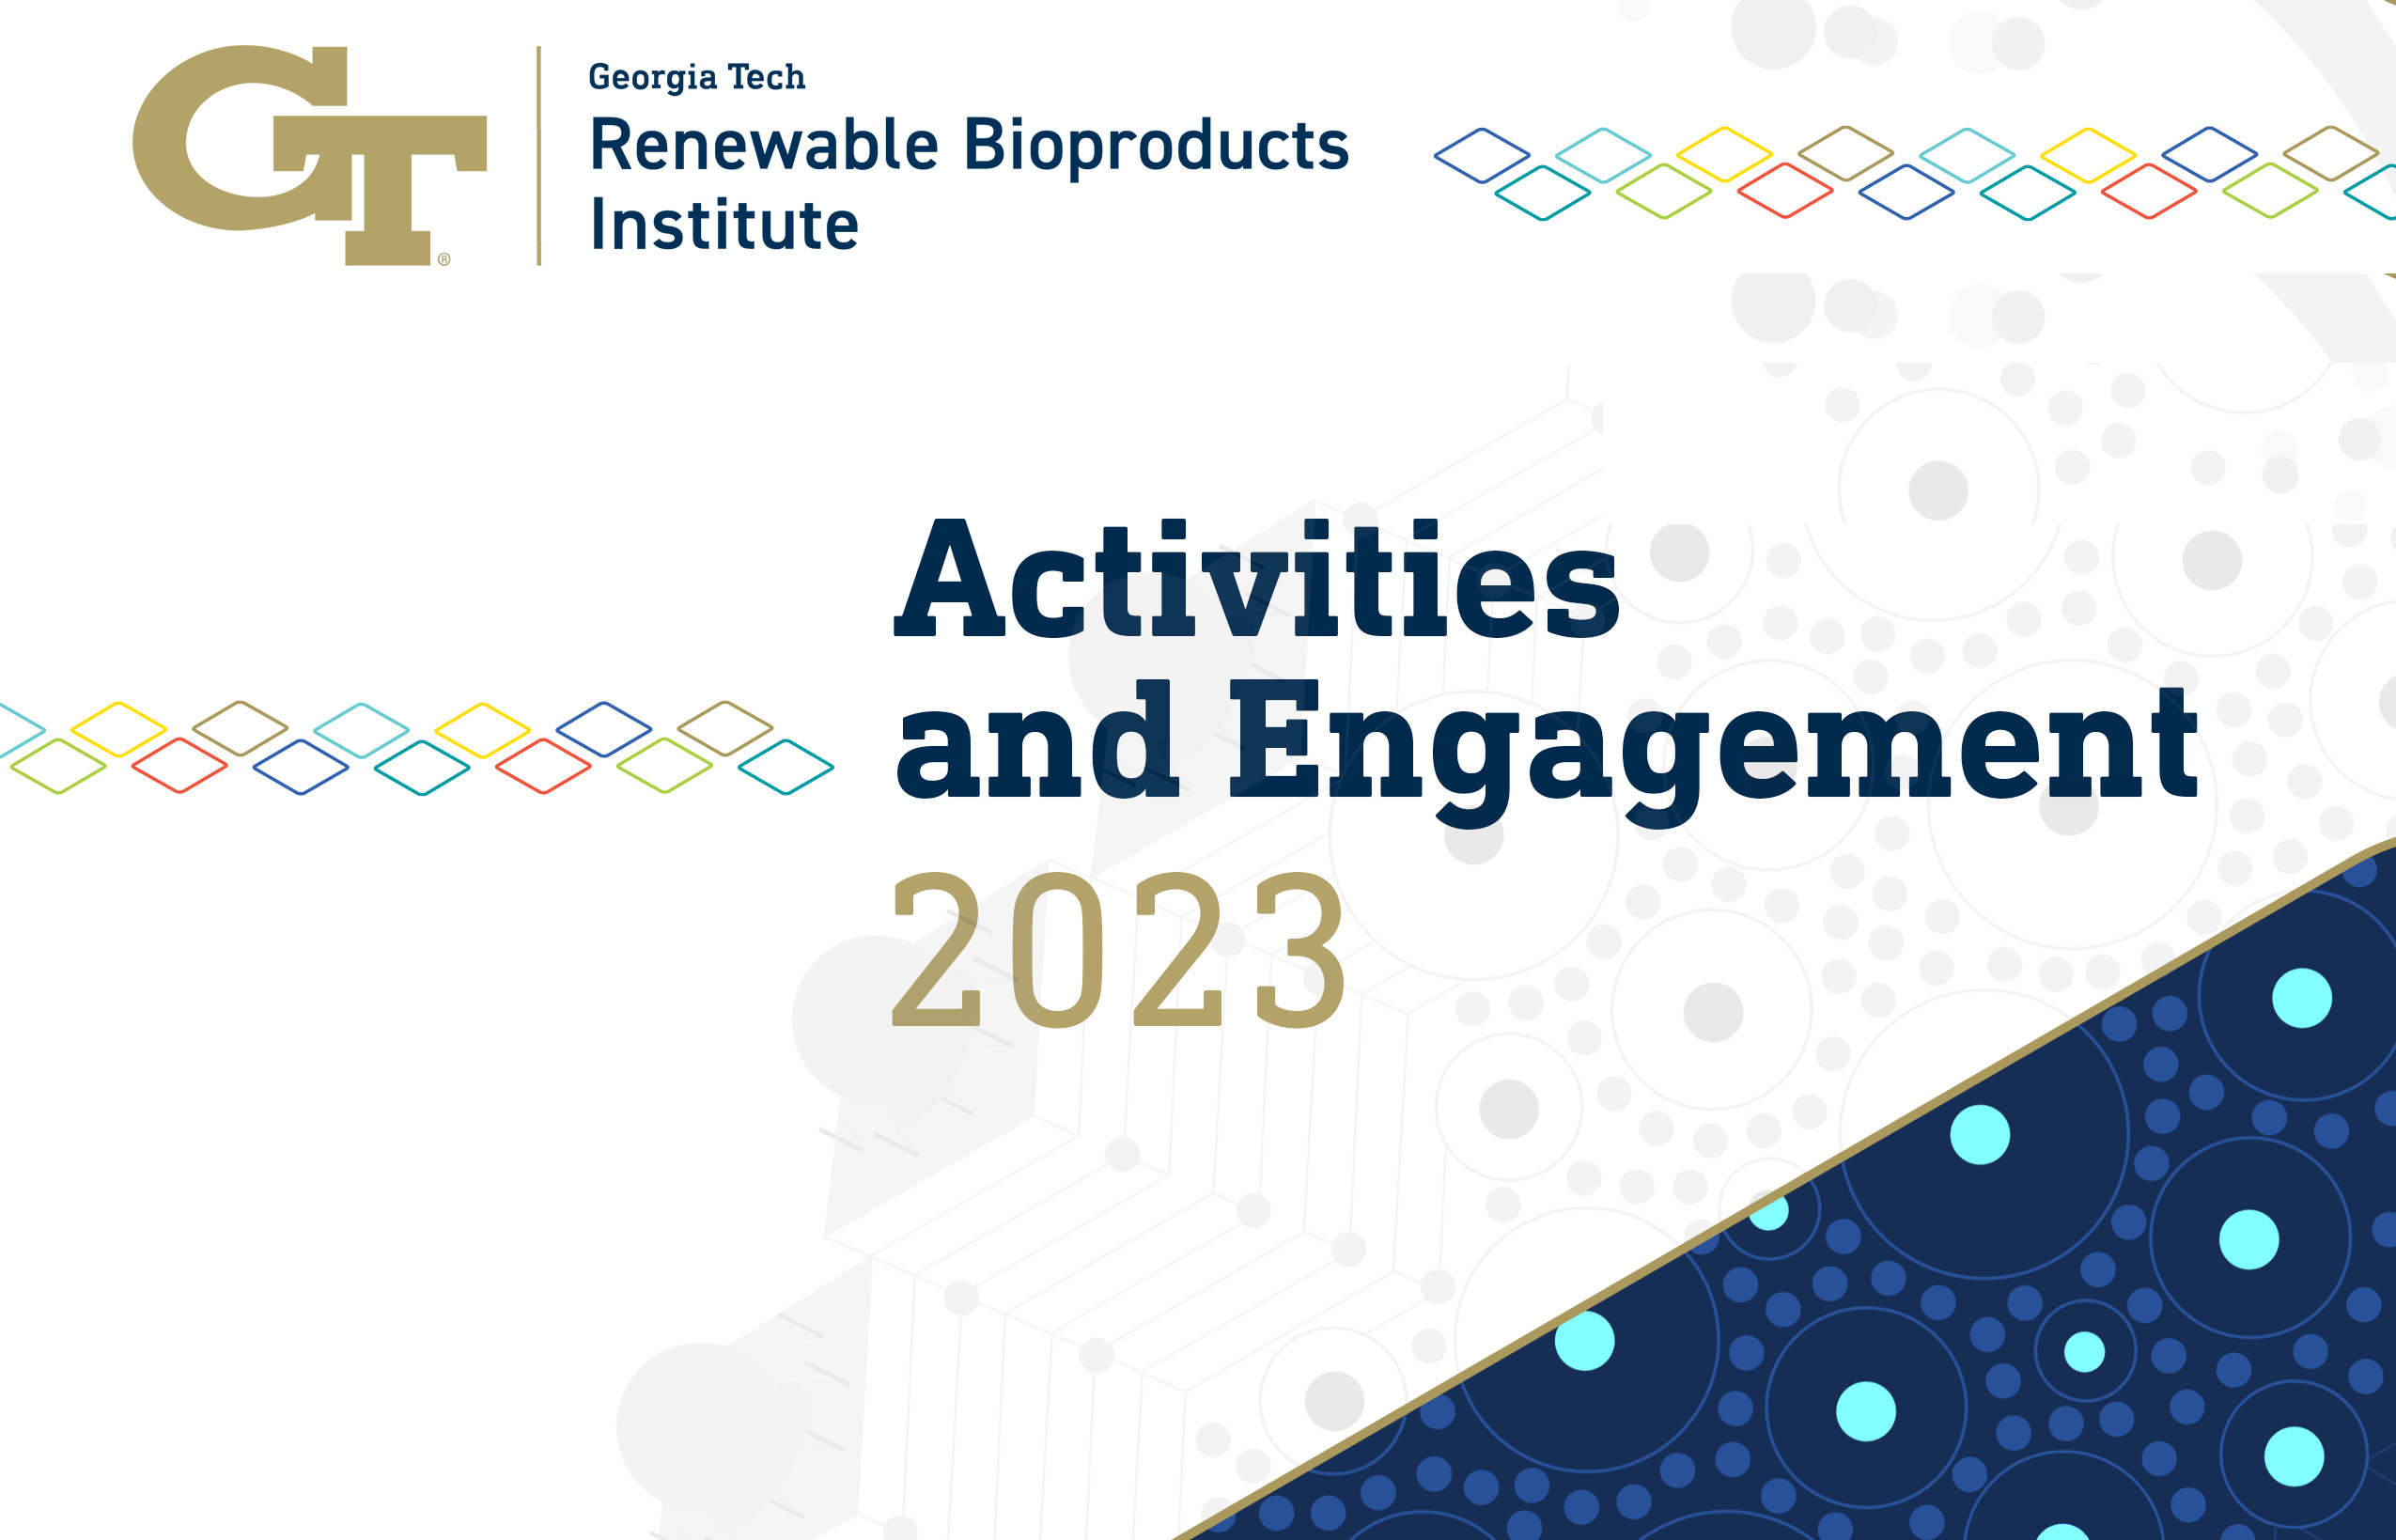 Image with RBI logo and 2023 Activities and Engagement Text